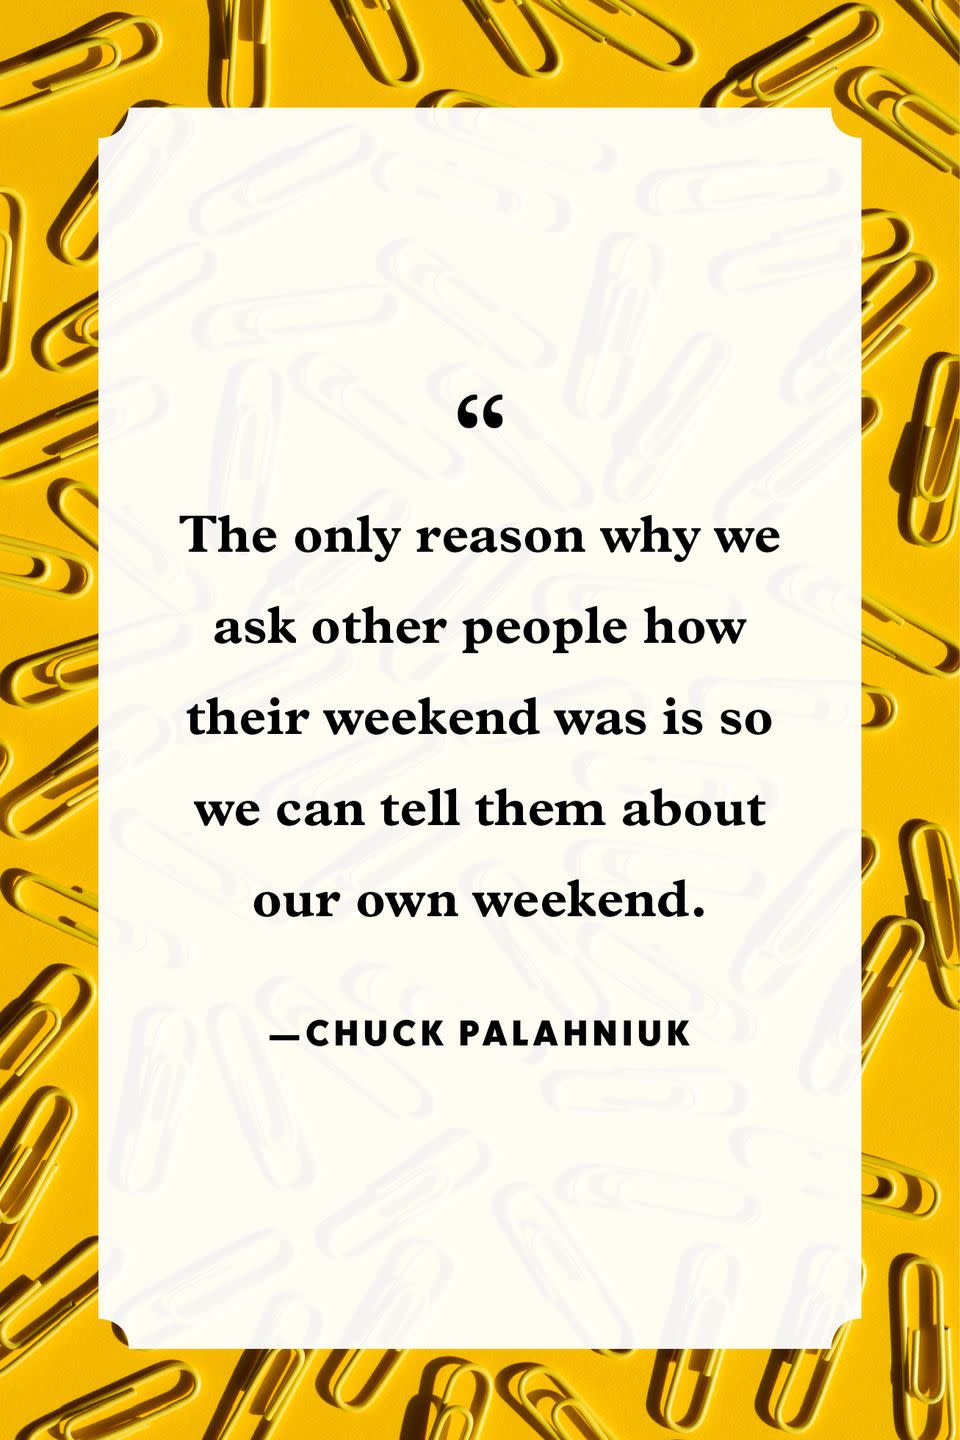 28 Happy Friday Quotes to Help You Make the Most of the Weekend